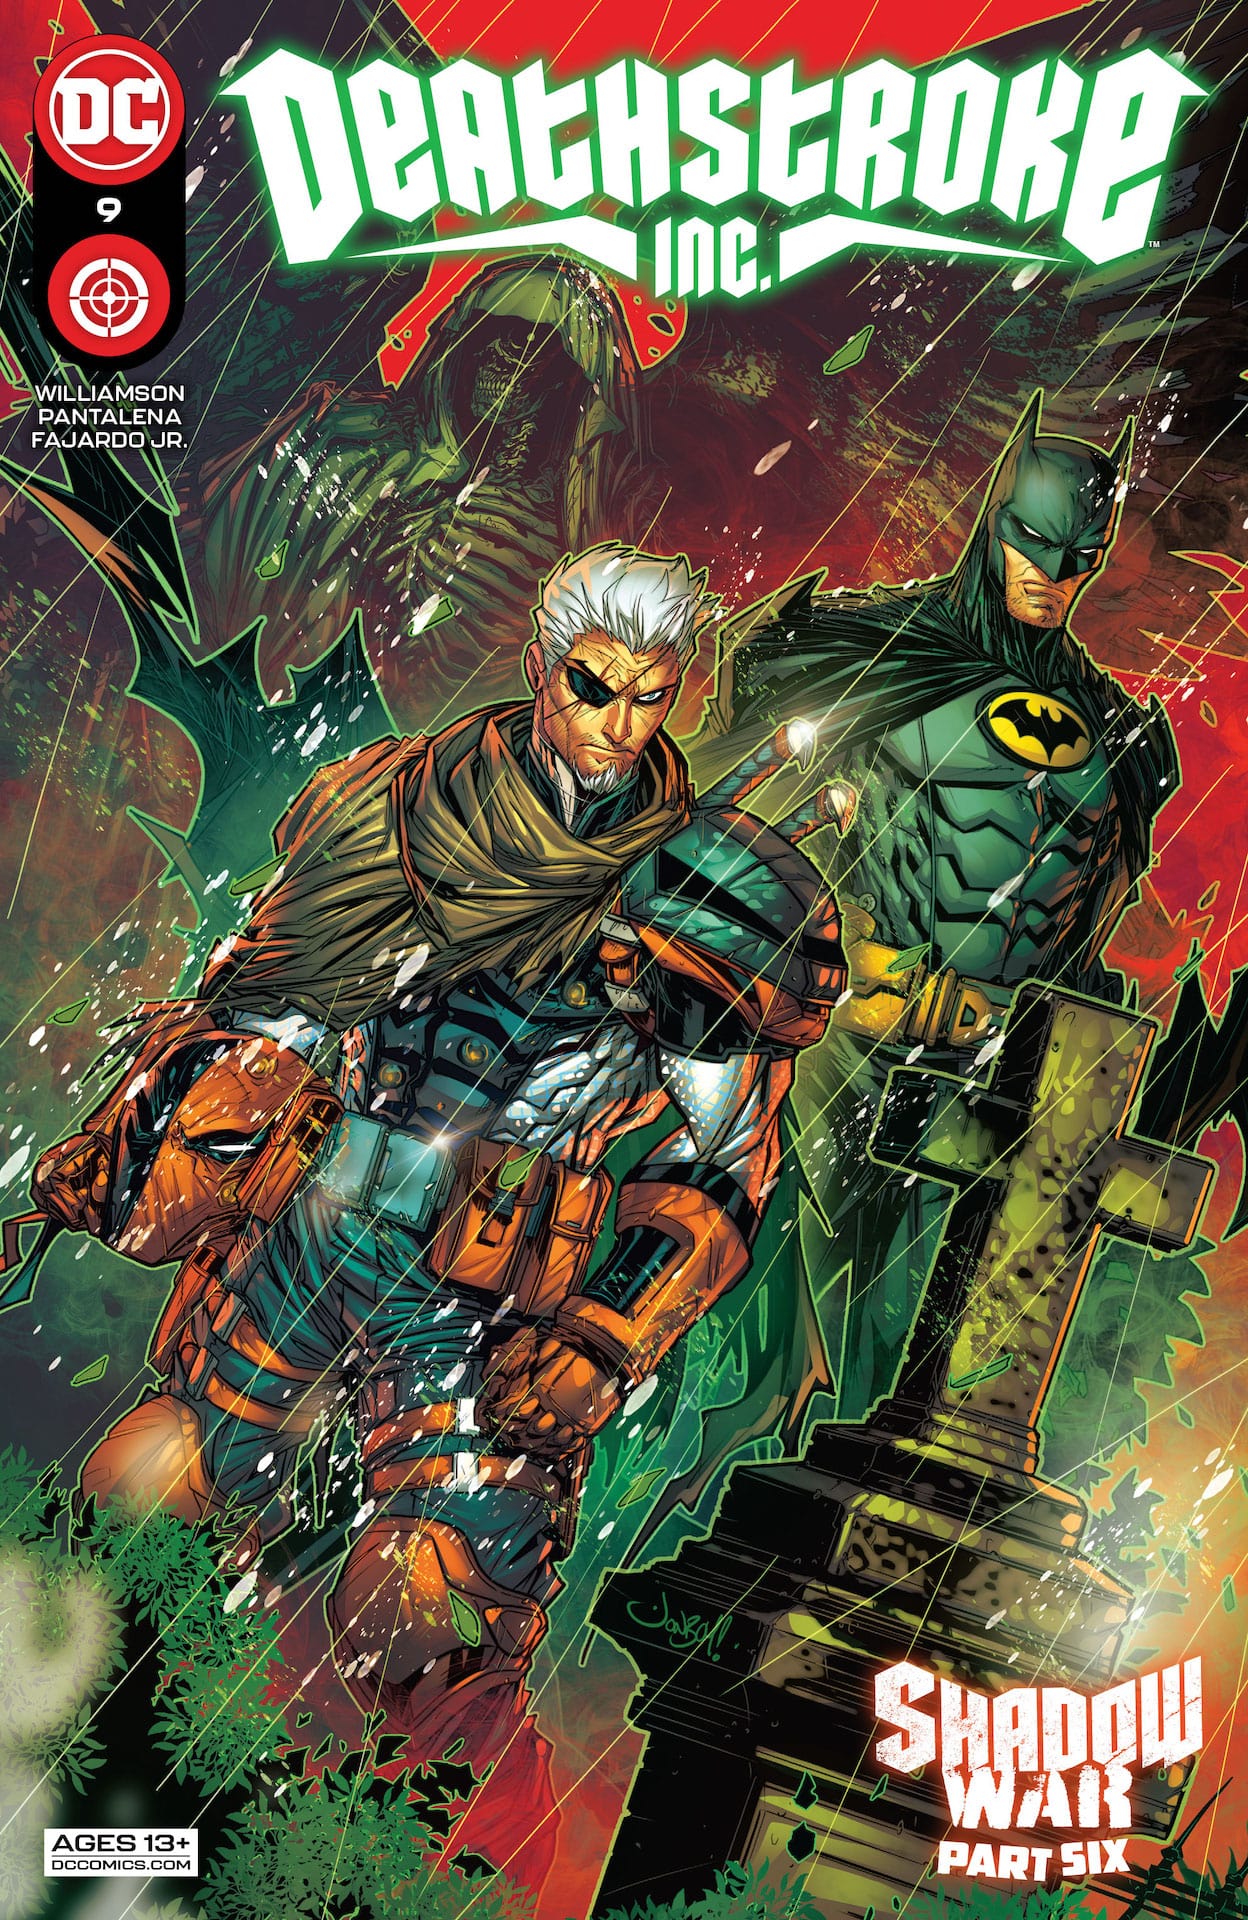 DC Preview: Deathstroke Inc. #9